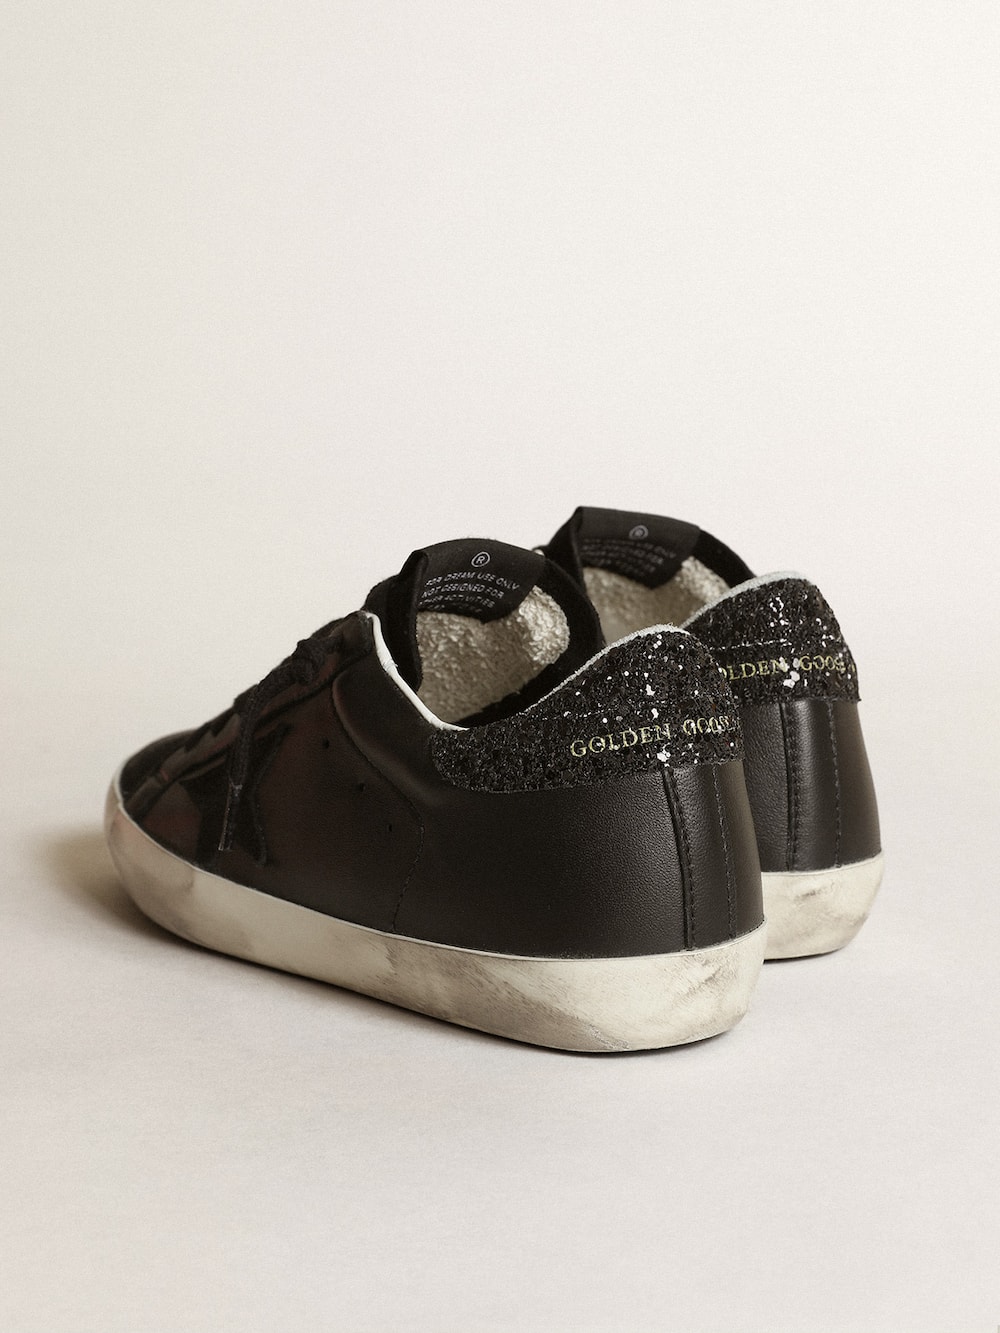 Golden Goose - Women's Super-Star in black nappa with black star and glitter heel tab in 